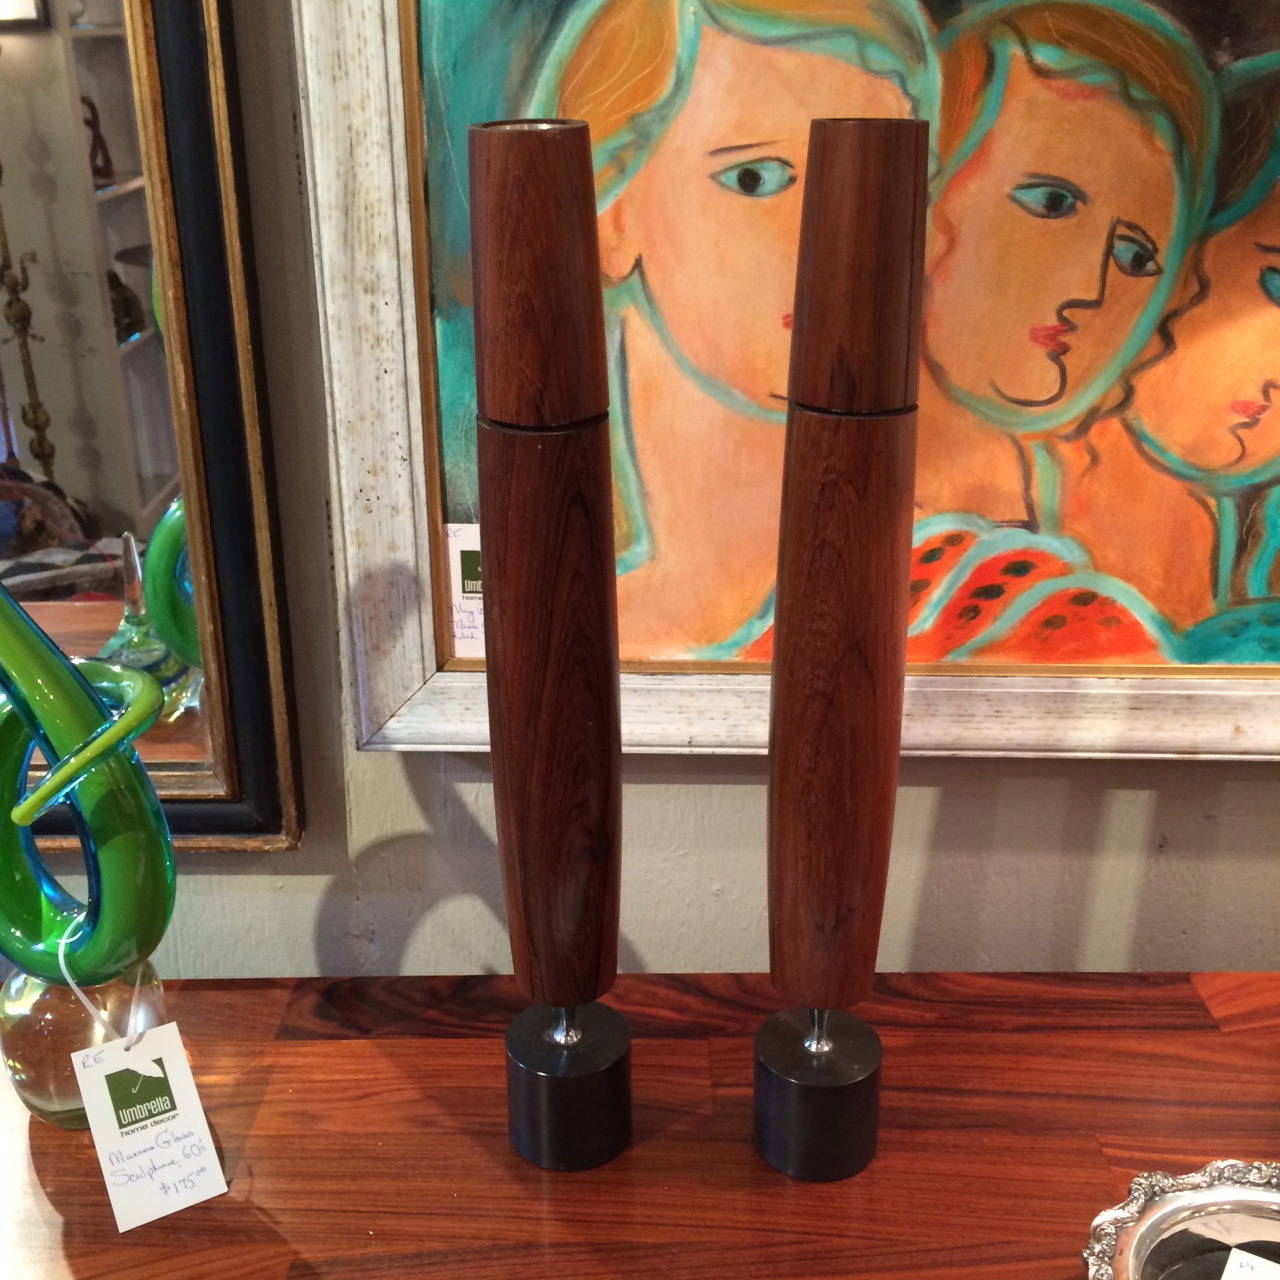 Sleek Rosewood Candlesticks, originally Ronson butane was used to fill up the inner chambers, then the top was turned to light flame.  Base is solid steel with a gun metal patination.  Labeled and dated on the underside.  Like abstract sculptures.